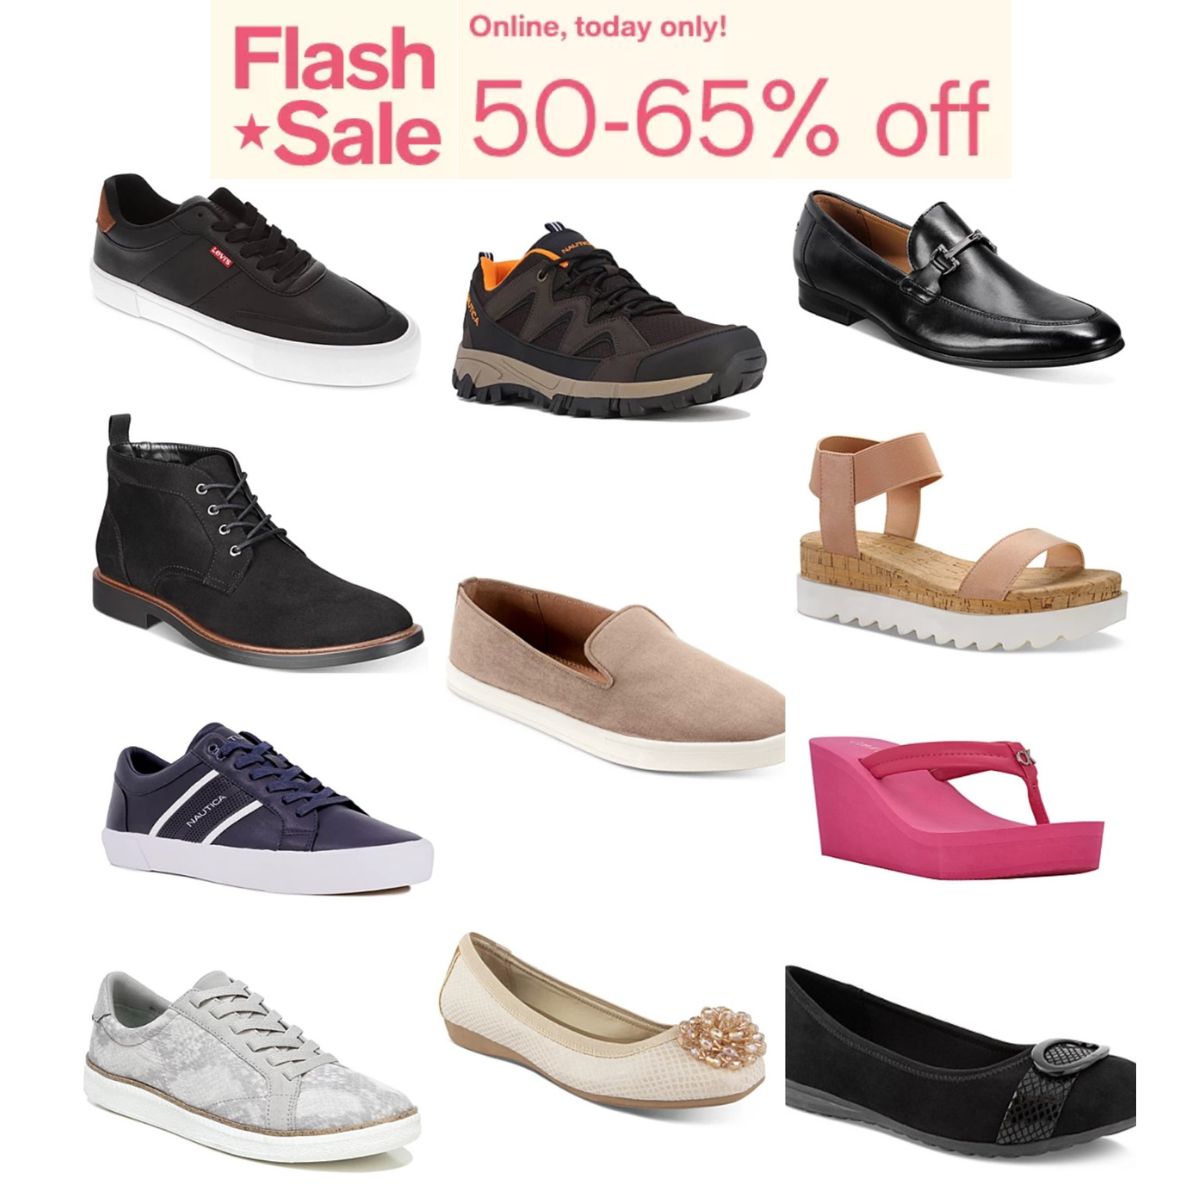 Flash sale men's and women's branded shoes at Macy's | 50-65% off | Smart